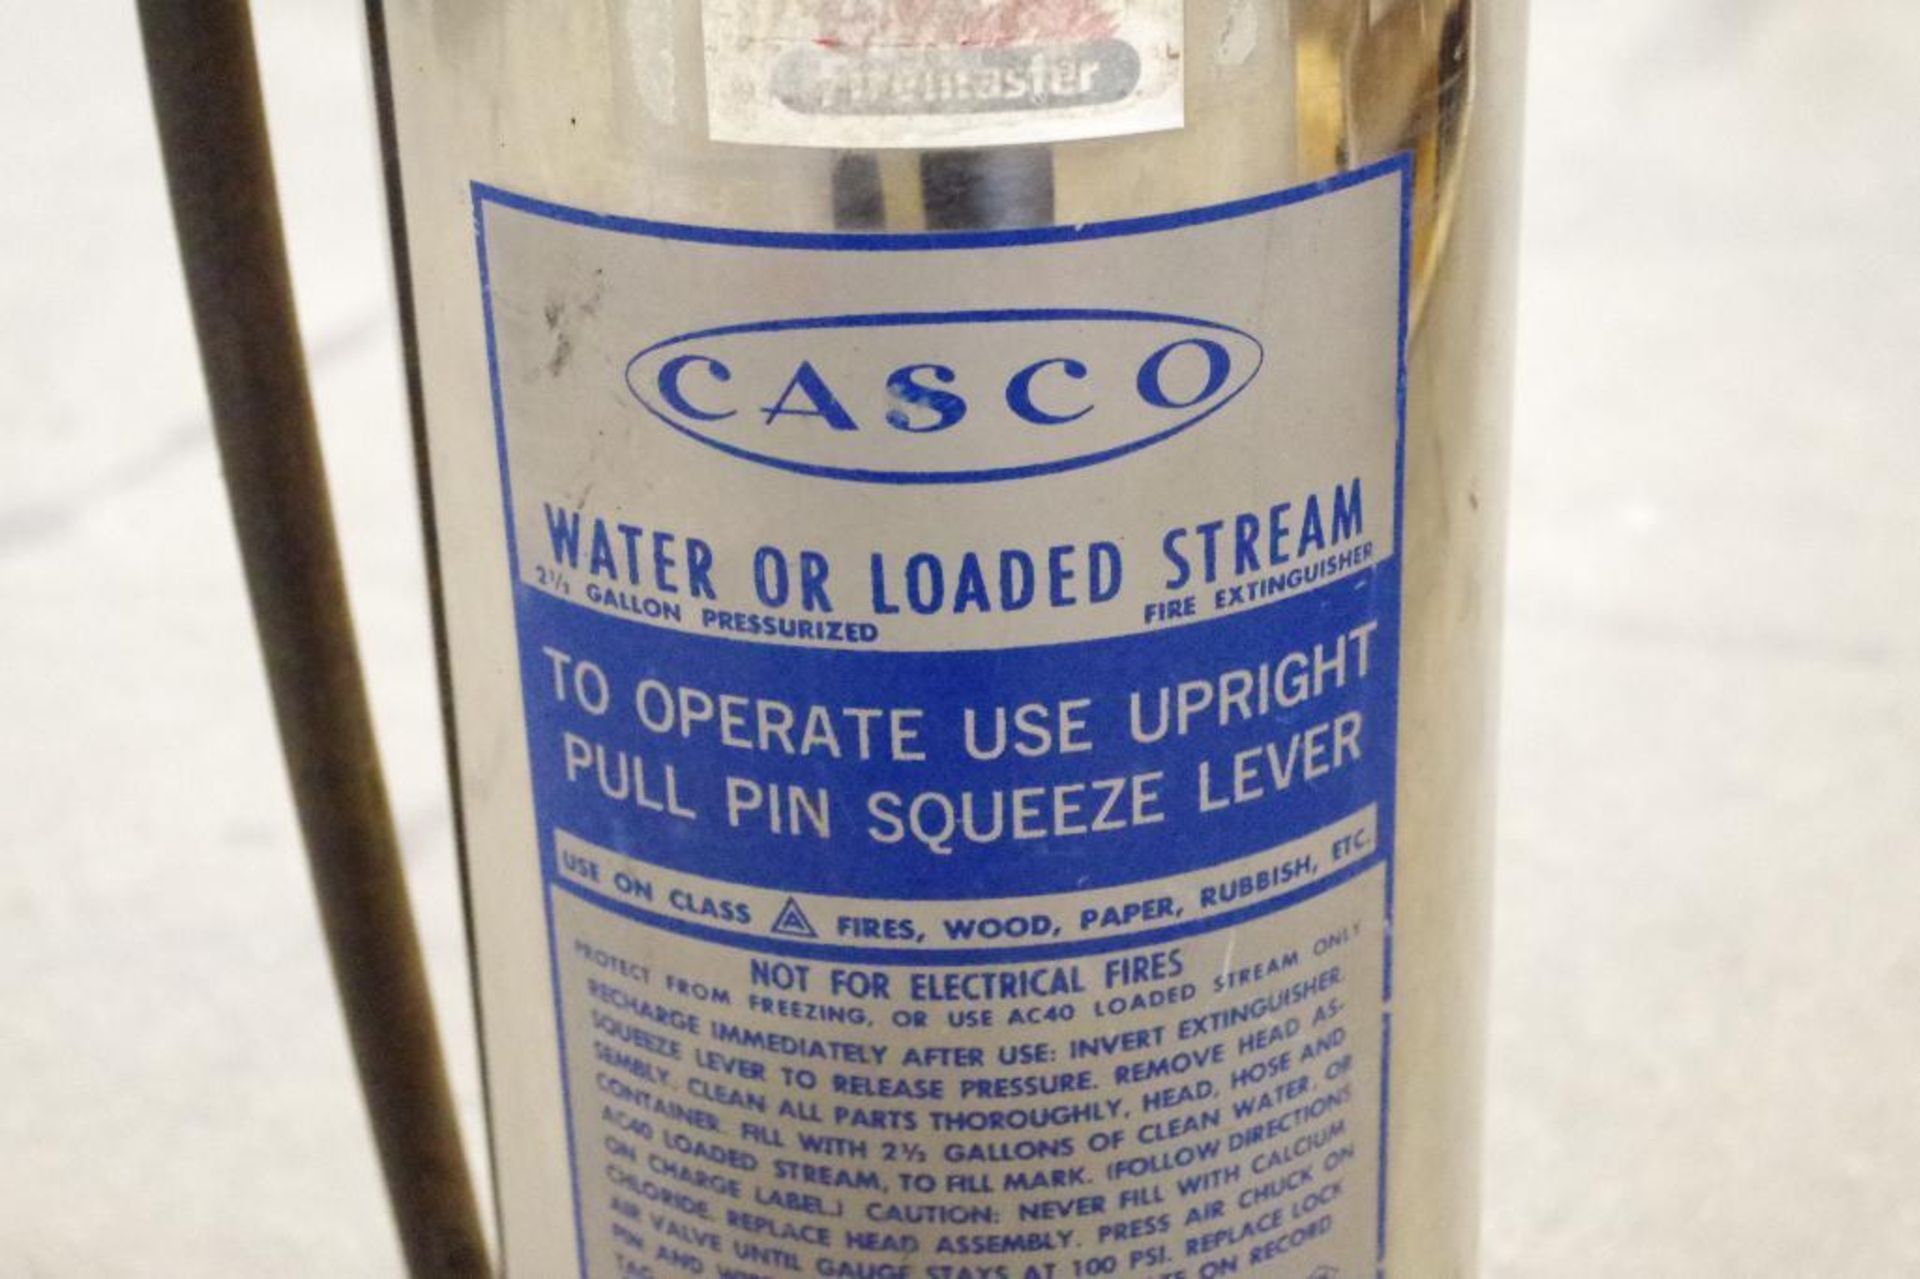 CASCO 2 1/2 Gal. Water or Loaded Stream Fire Extinguisher - Image 2 of 3